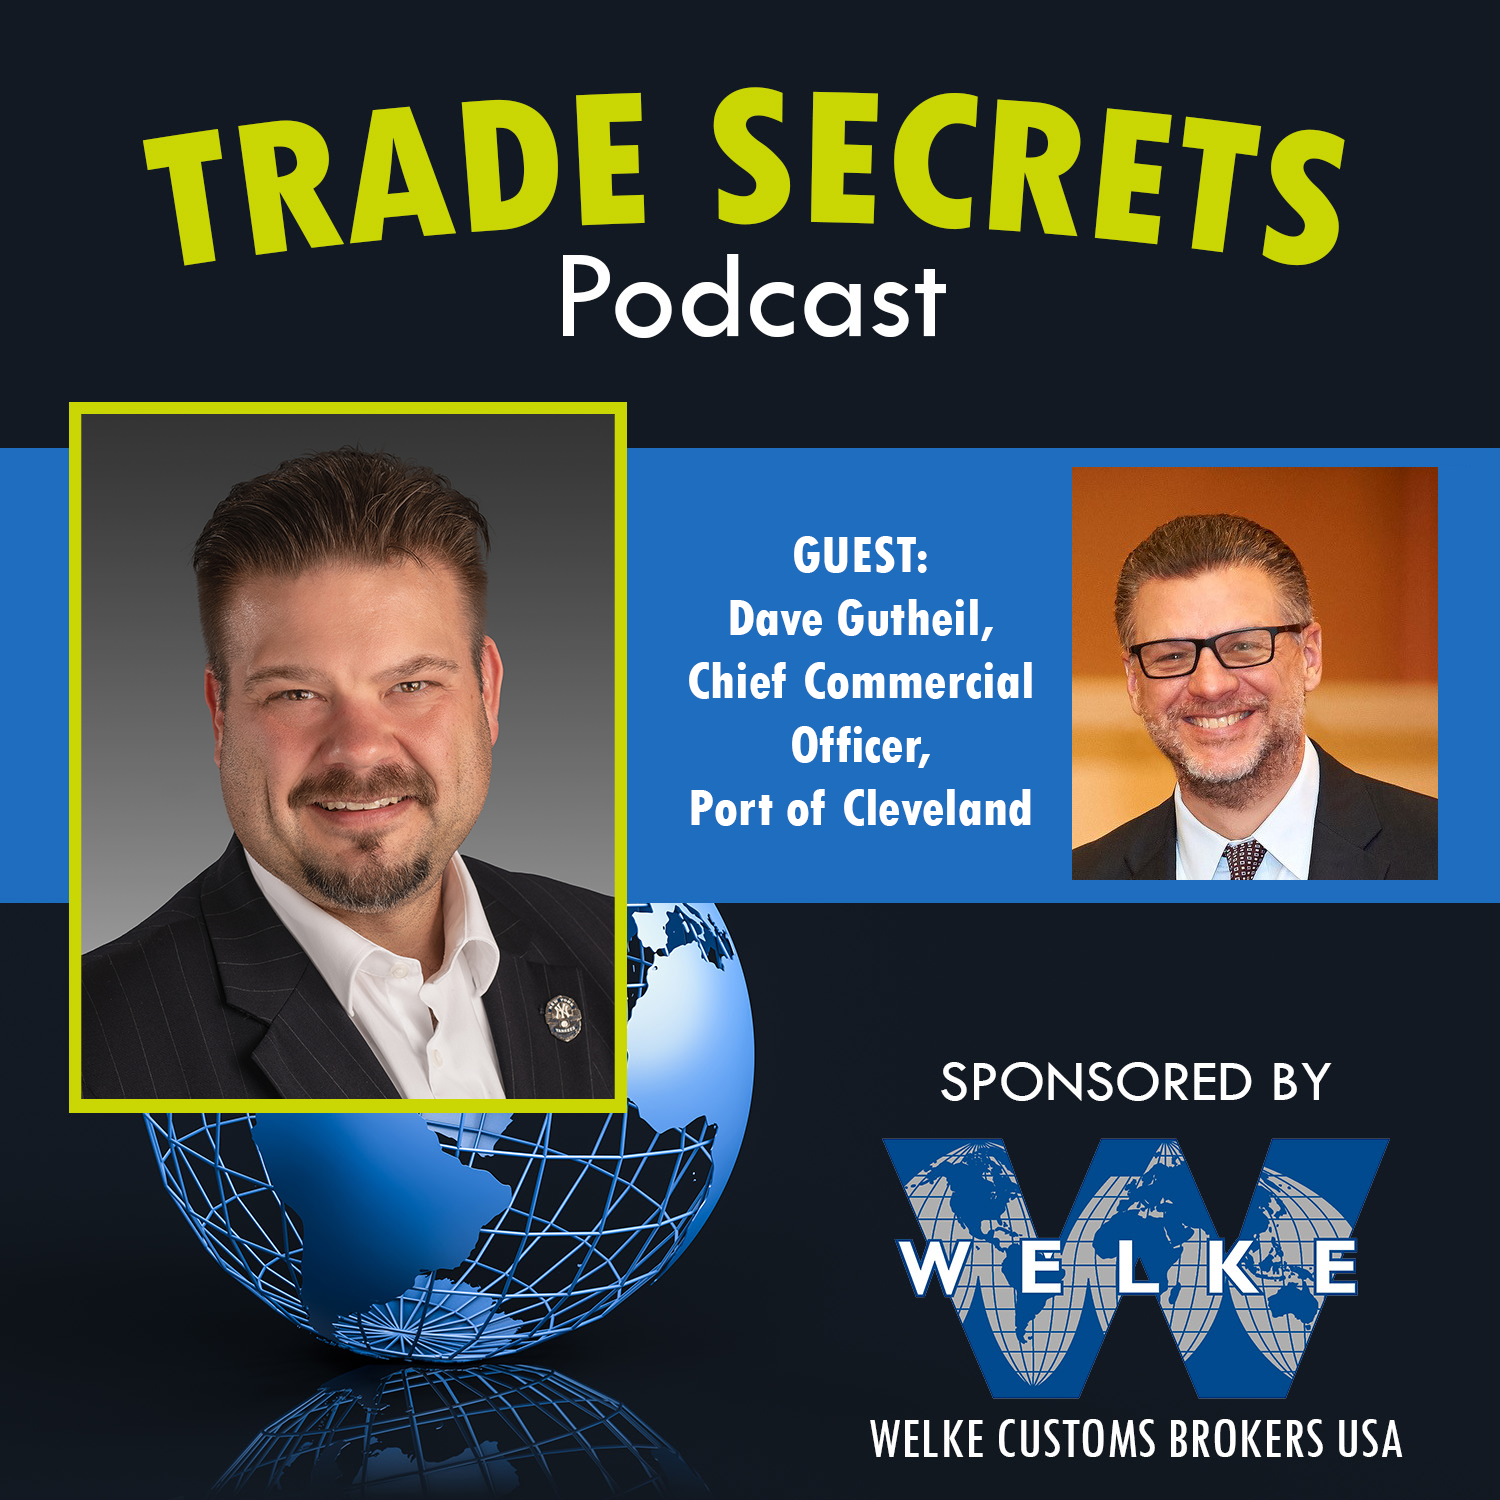 Trade Secrets - Episode 23 Dave Gutheil Chief Commercial Officer, Port of Cleveland